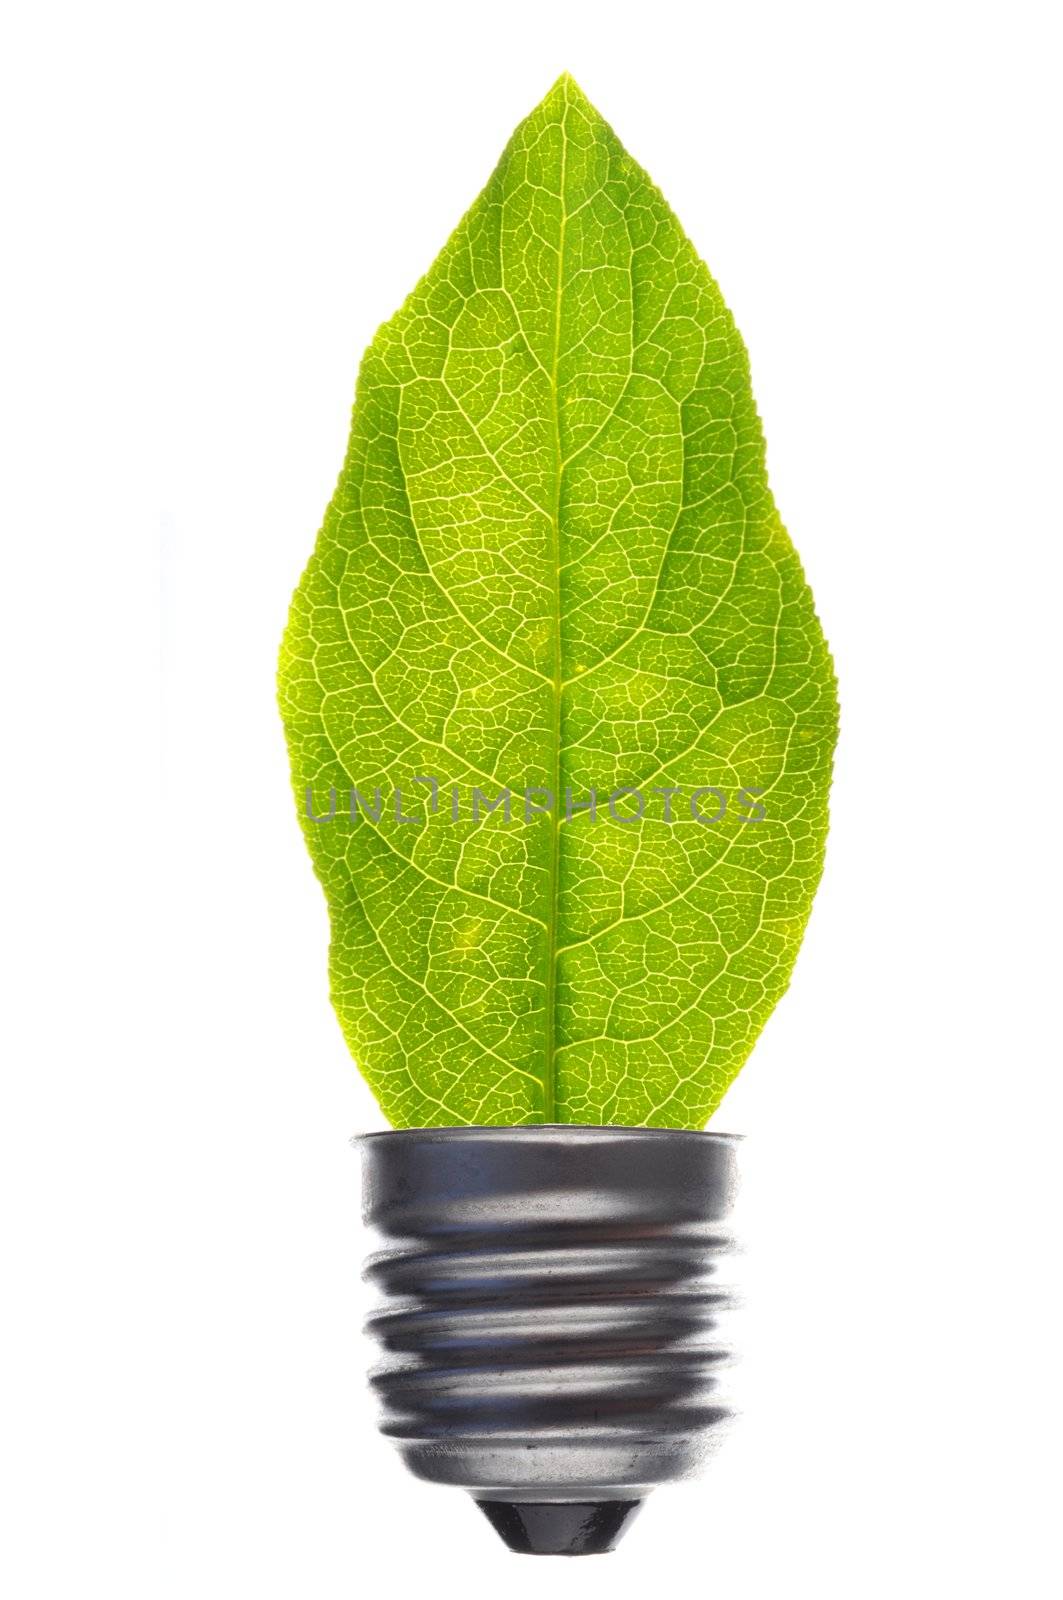 green leaf and bulb isolated on white showing ecological power concept